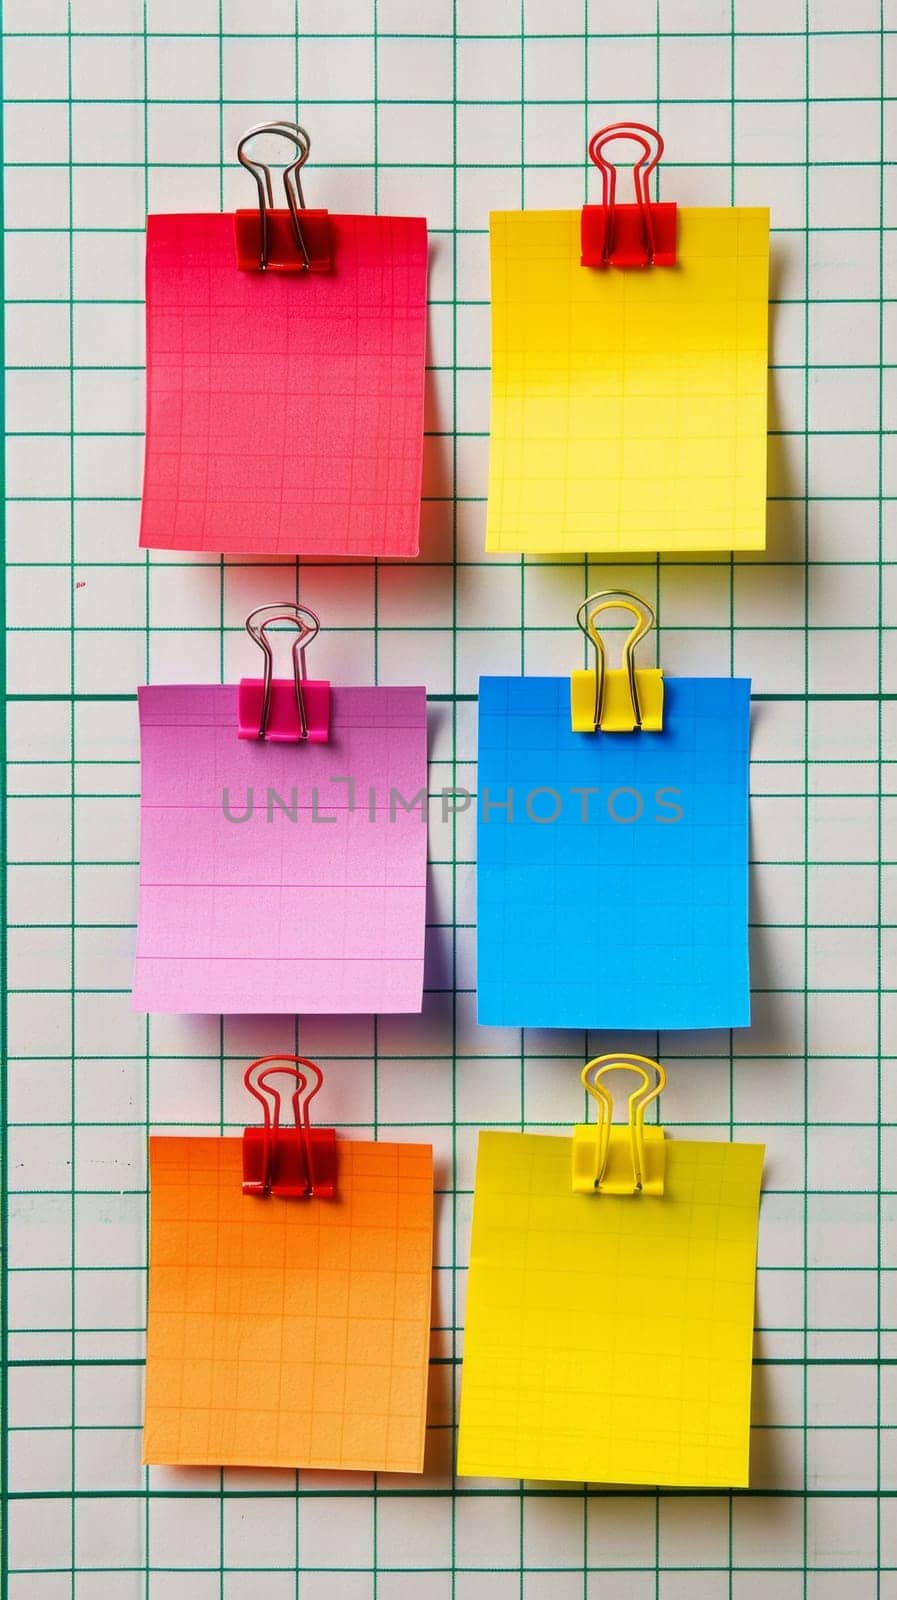 A row of colorful paper clips with different colored papers attached